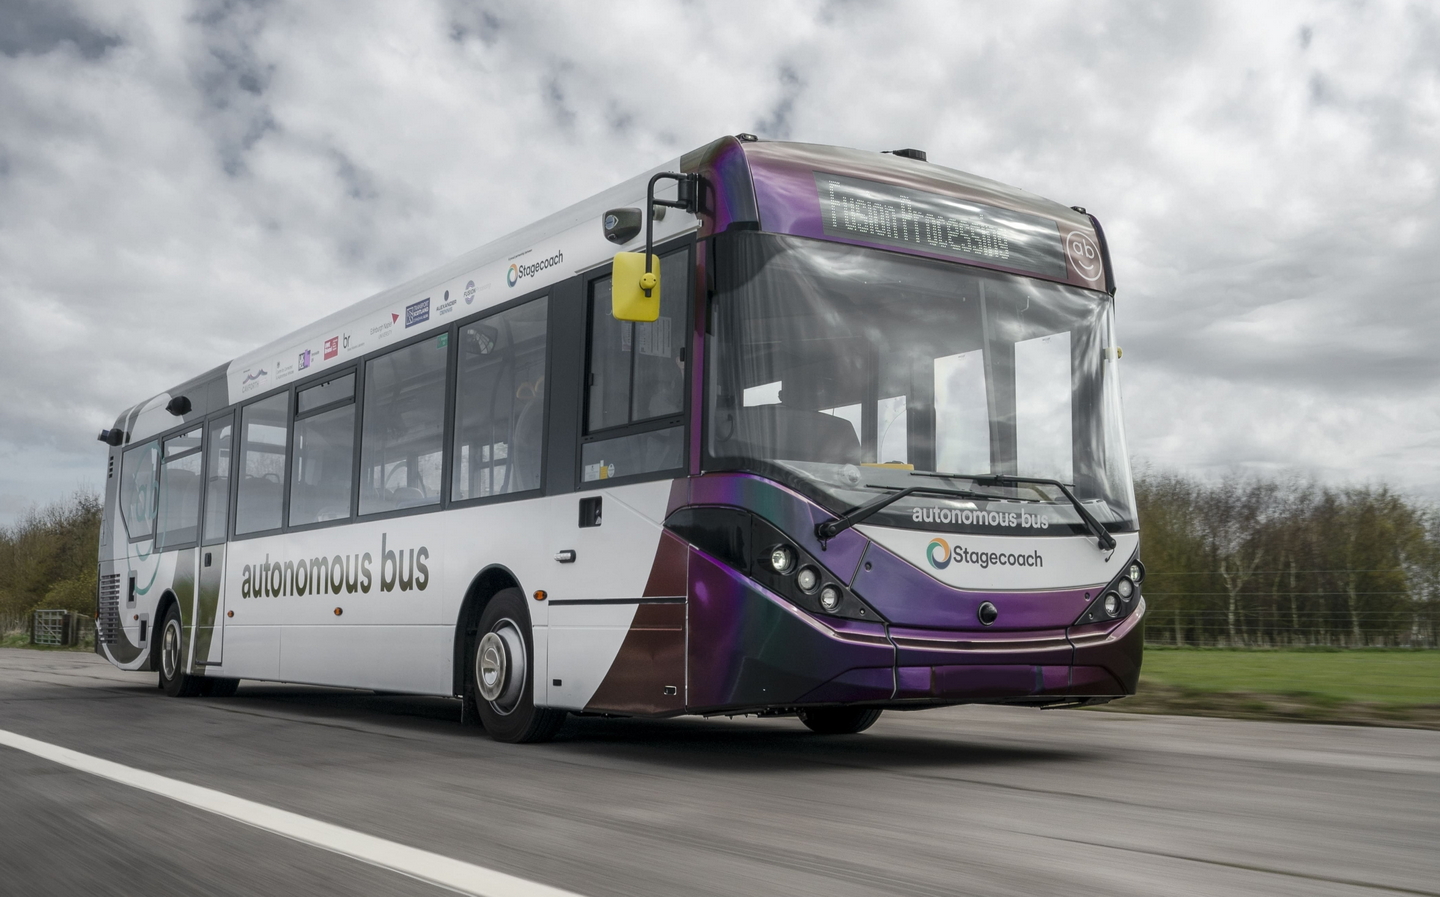 Autonomous bus begins testing in Scotland ahead of pilot service later in the summer